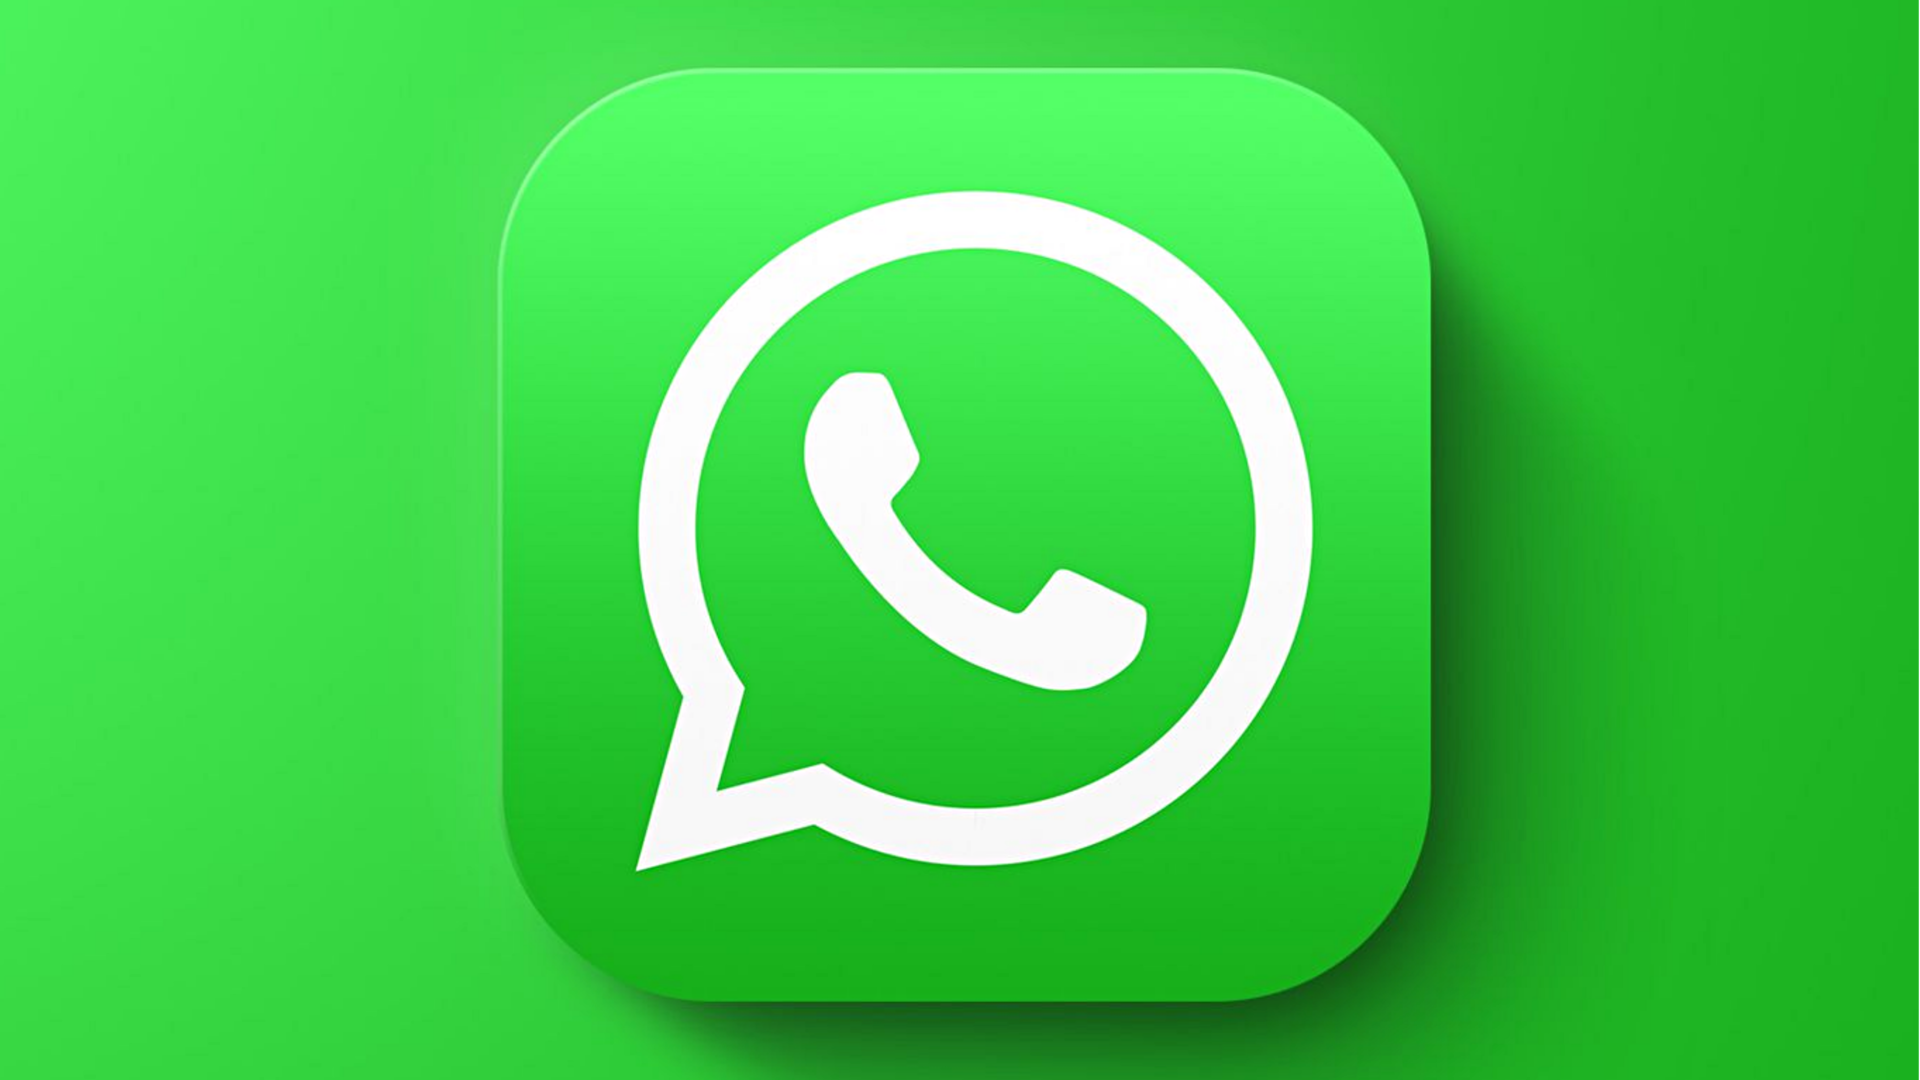 New WhatsApp features: Searching for groups, reacting to messages